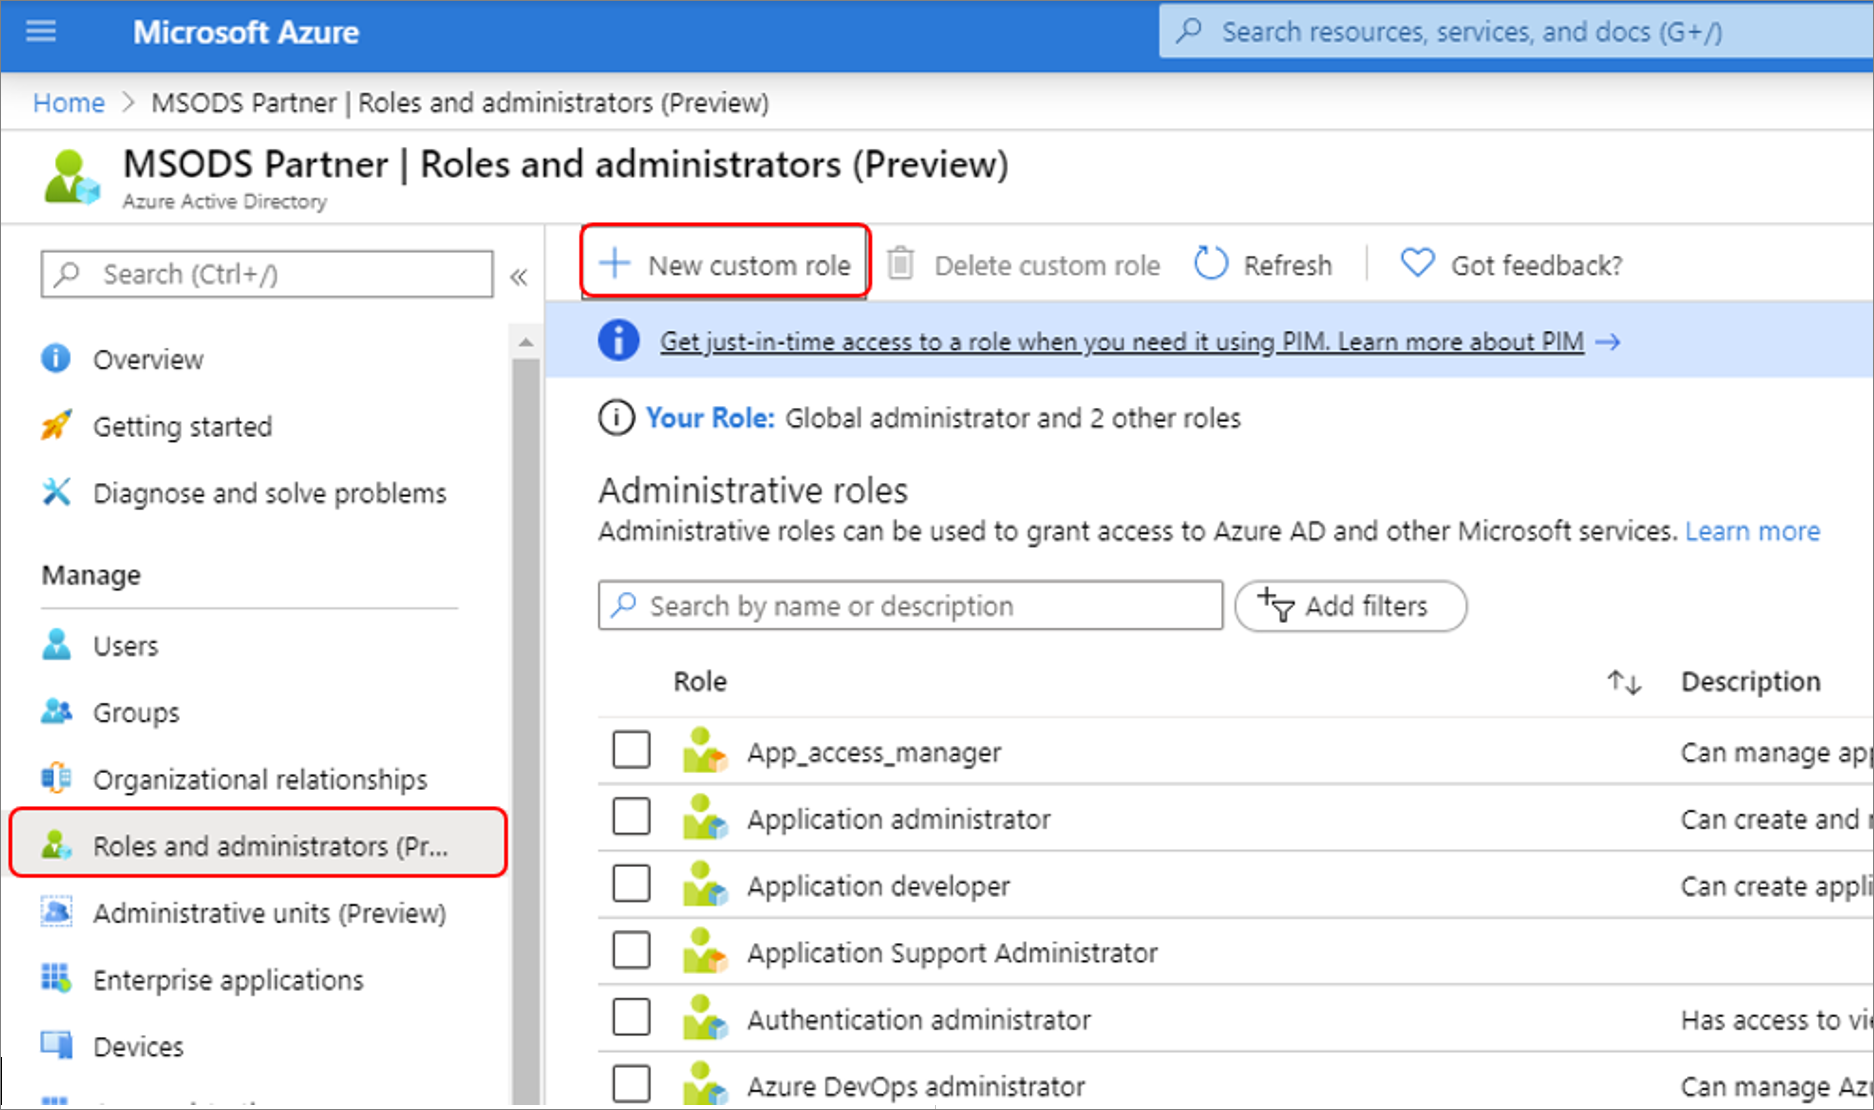 Add a new custom role from the roles list in Microsoft Entra ID